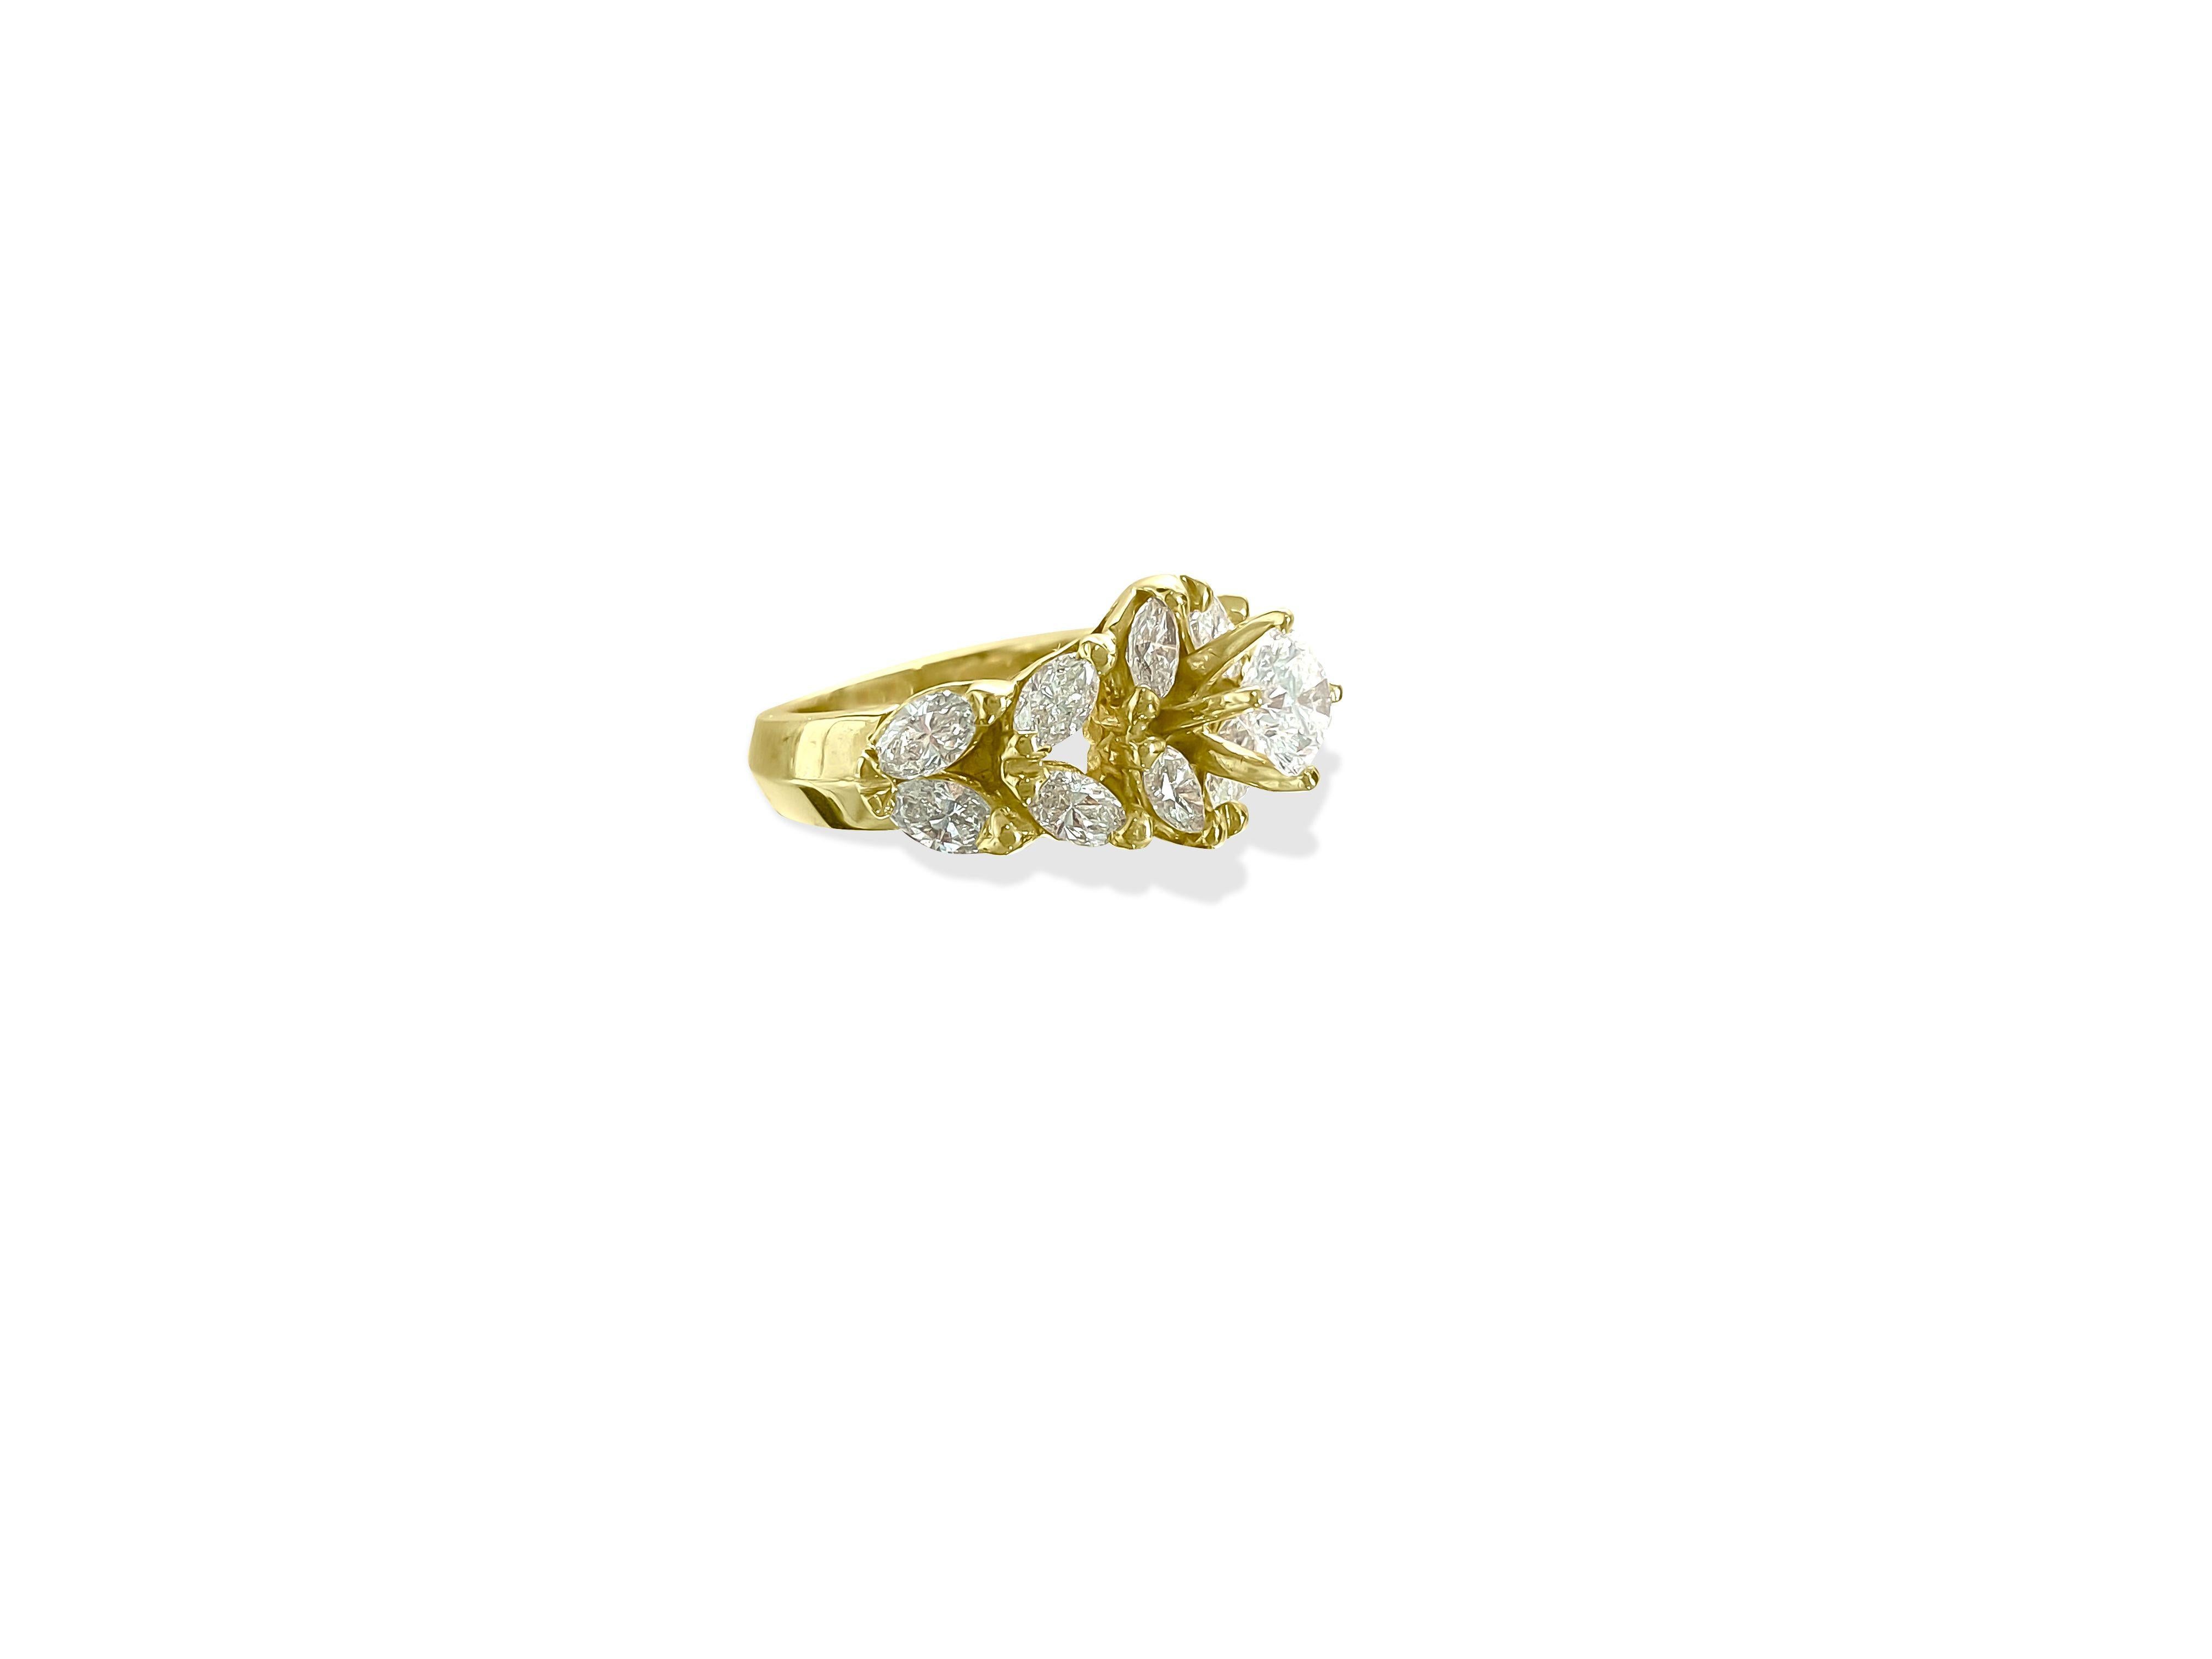 Forged from opulent 14K yellow gold, this magnificent ring features a captivating 0.75 carat round brilliant-cut center diamond, accompanied by 1.10 carats of marquise-cut side diamonds, totaling 1.85 carats. Exhibiting a G color and Si clarity,